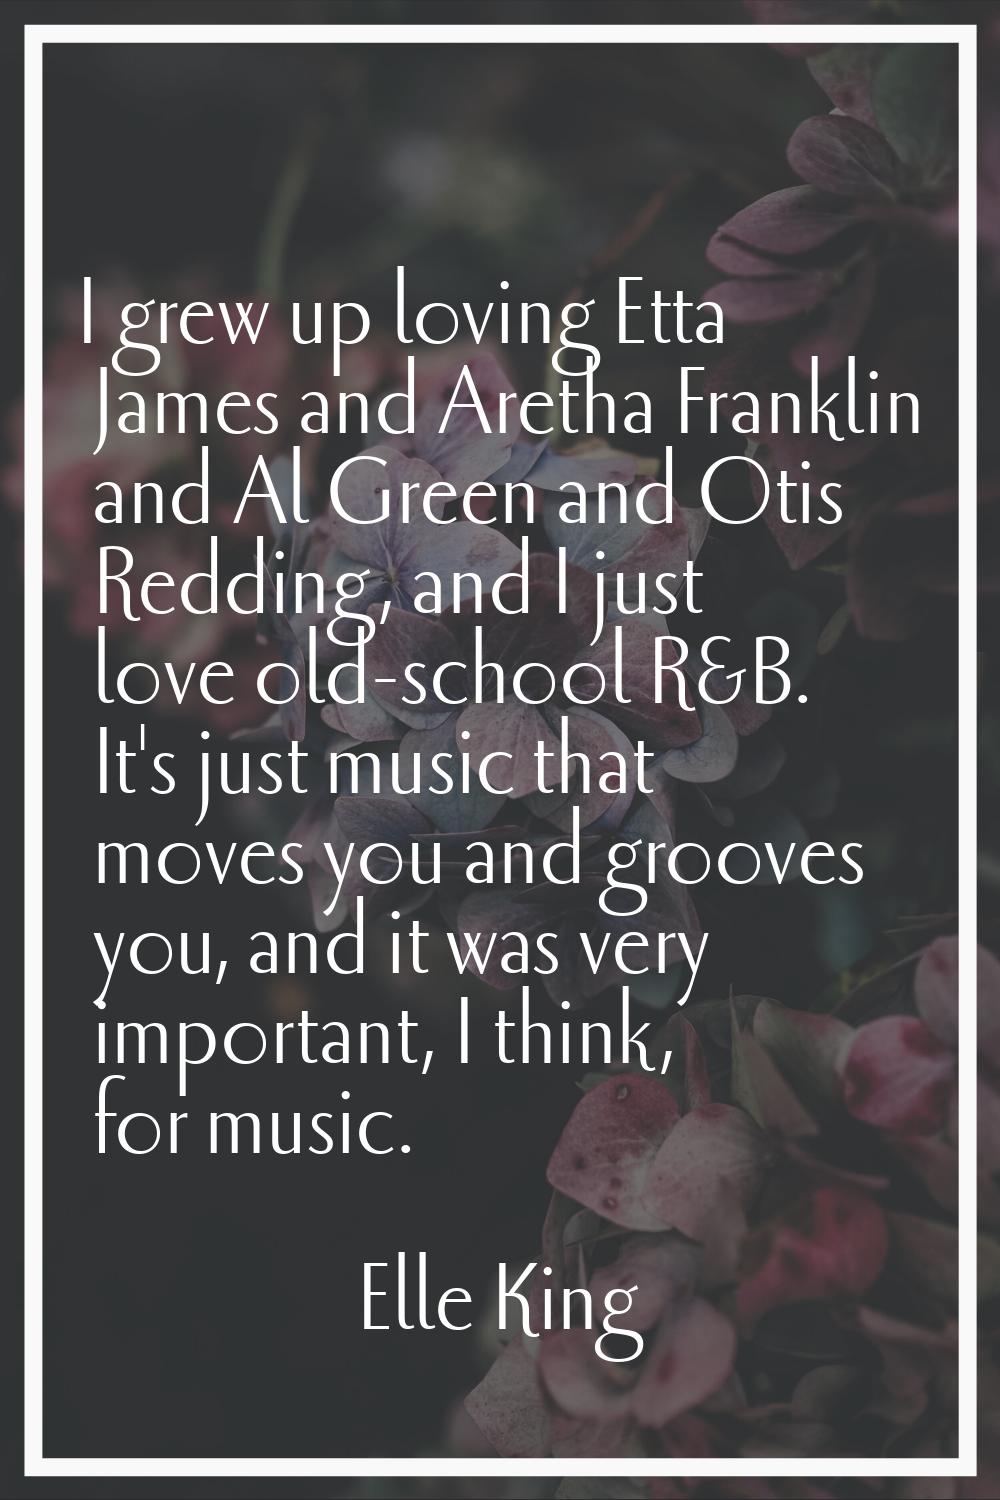 I grew up loving Etta James and Aretha Franklin and Al Green and Otis Redding, and I just love old-